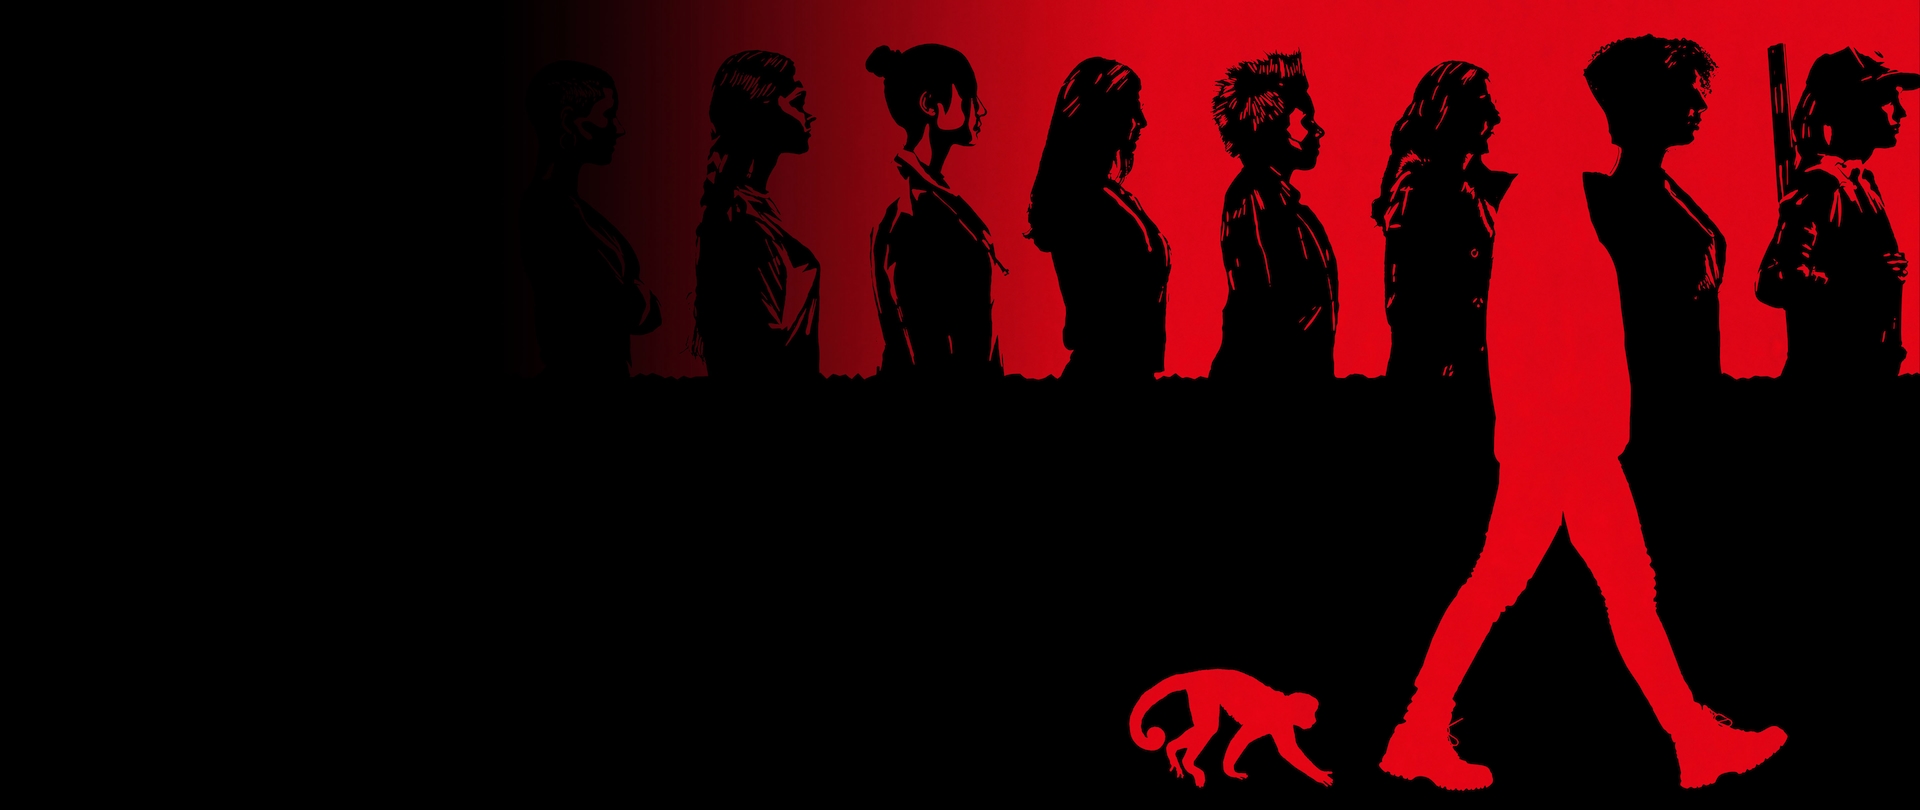 Black drawn figures of women on red background with one red shadow of man in gas mask and chimpanzee for FX's Y: The Last Man